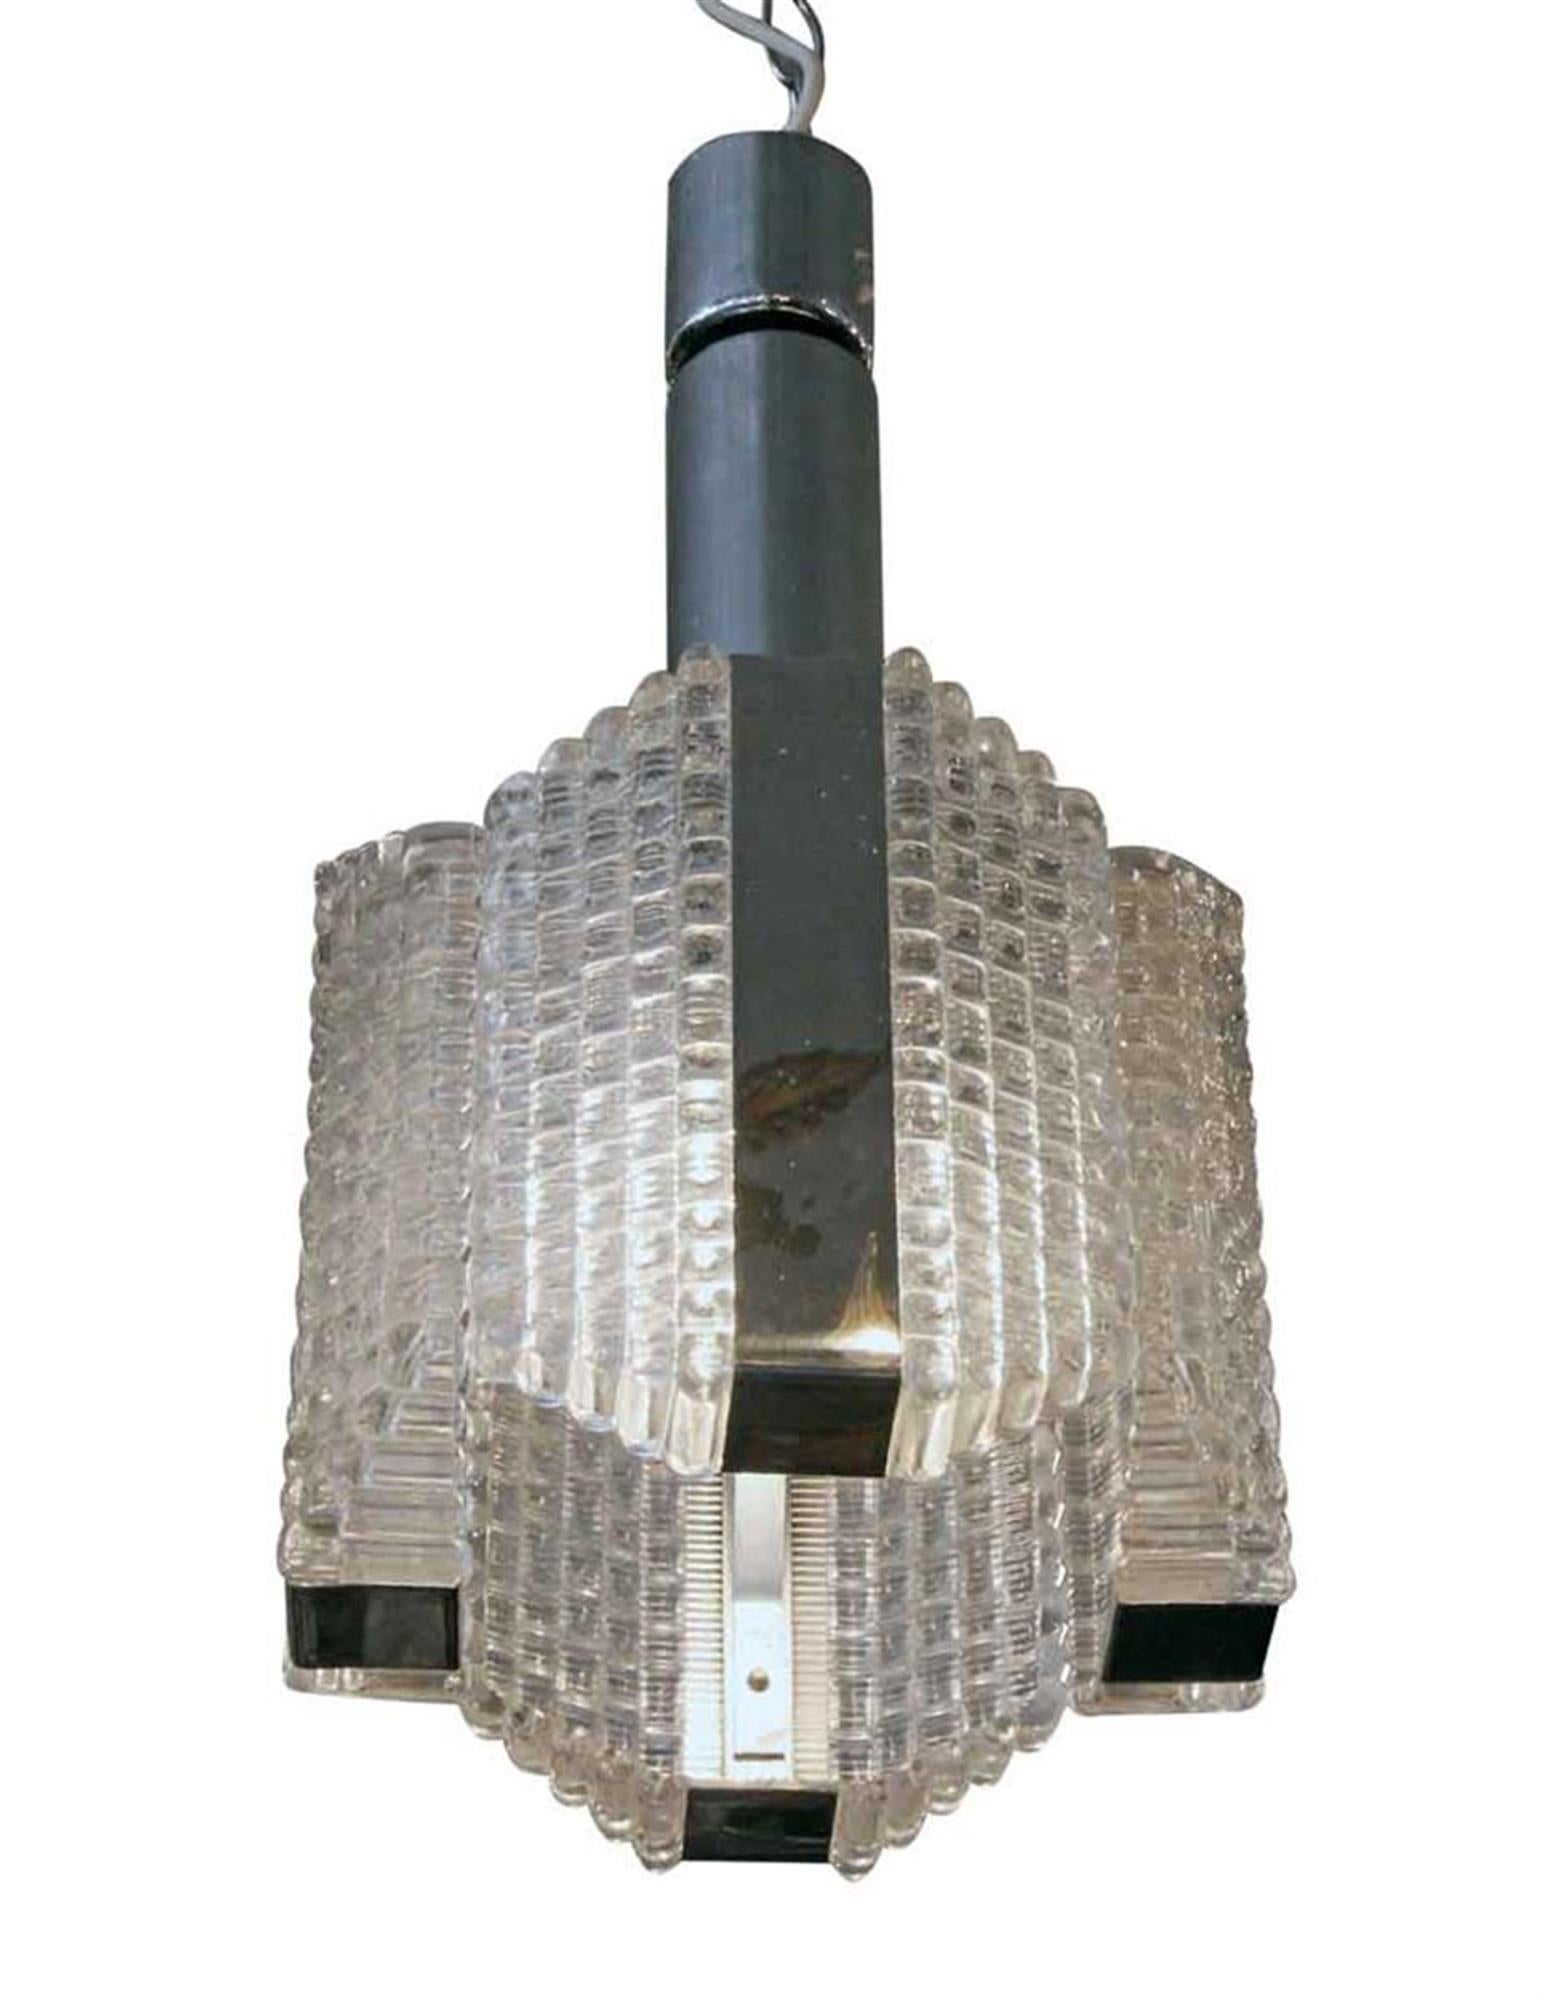 1960s Mid-Century Modern pendant hanging fixture with chrome detail and textured waffle glass. Please note, this item is located in our Scranton, PA location.